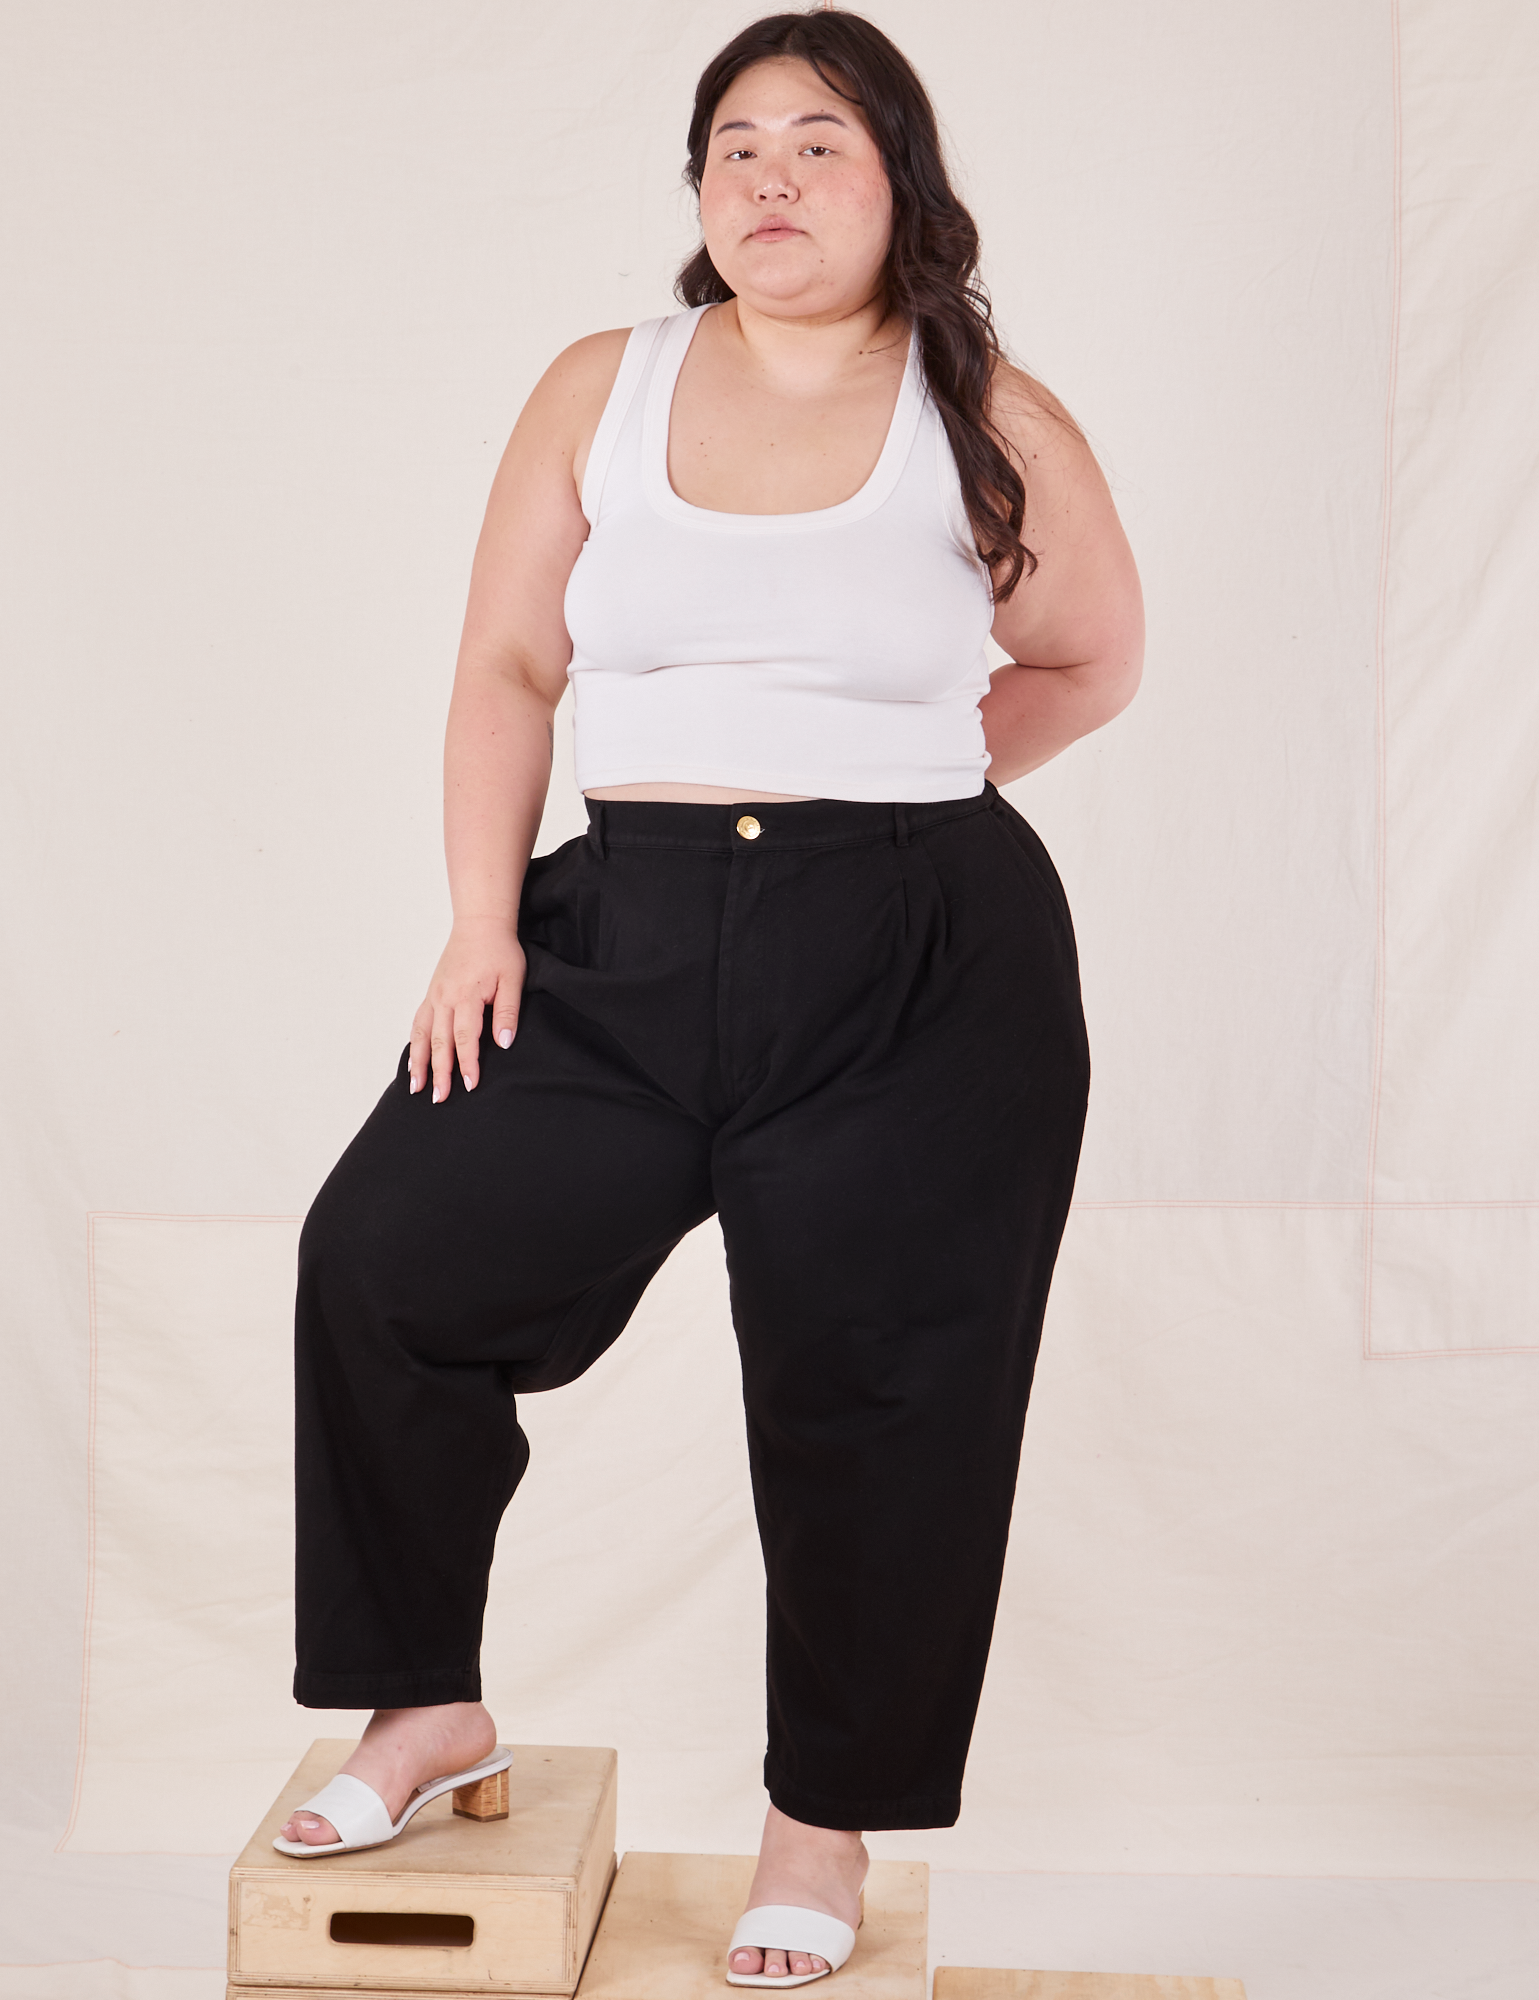 Ashley is 5&#39;7&quot; and wearing 1XL Petite Organic Trousers in Basic Black paired with Cropped Tank Top in vintage tee off-white